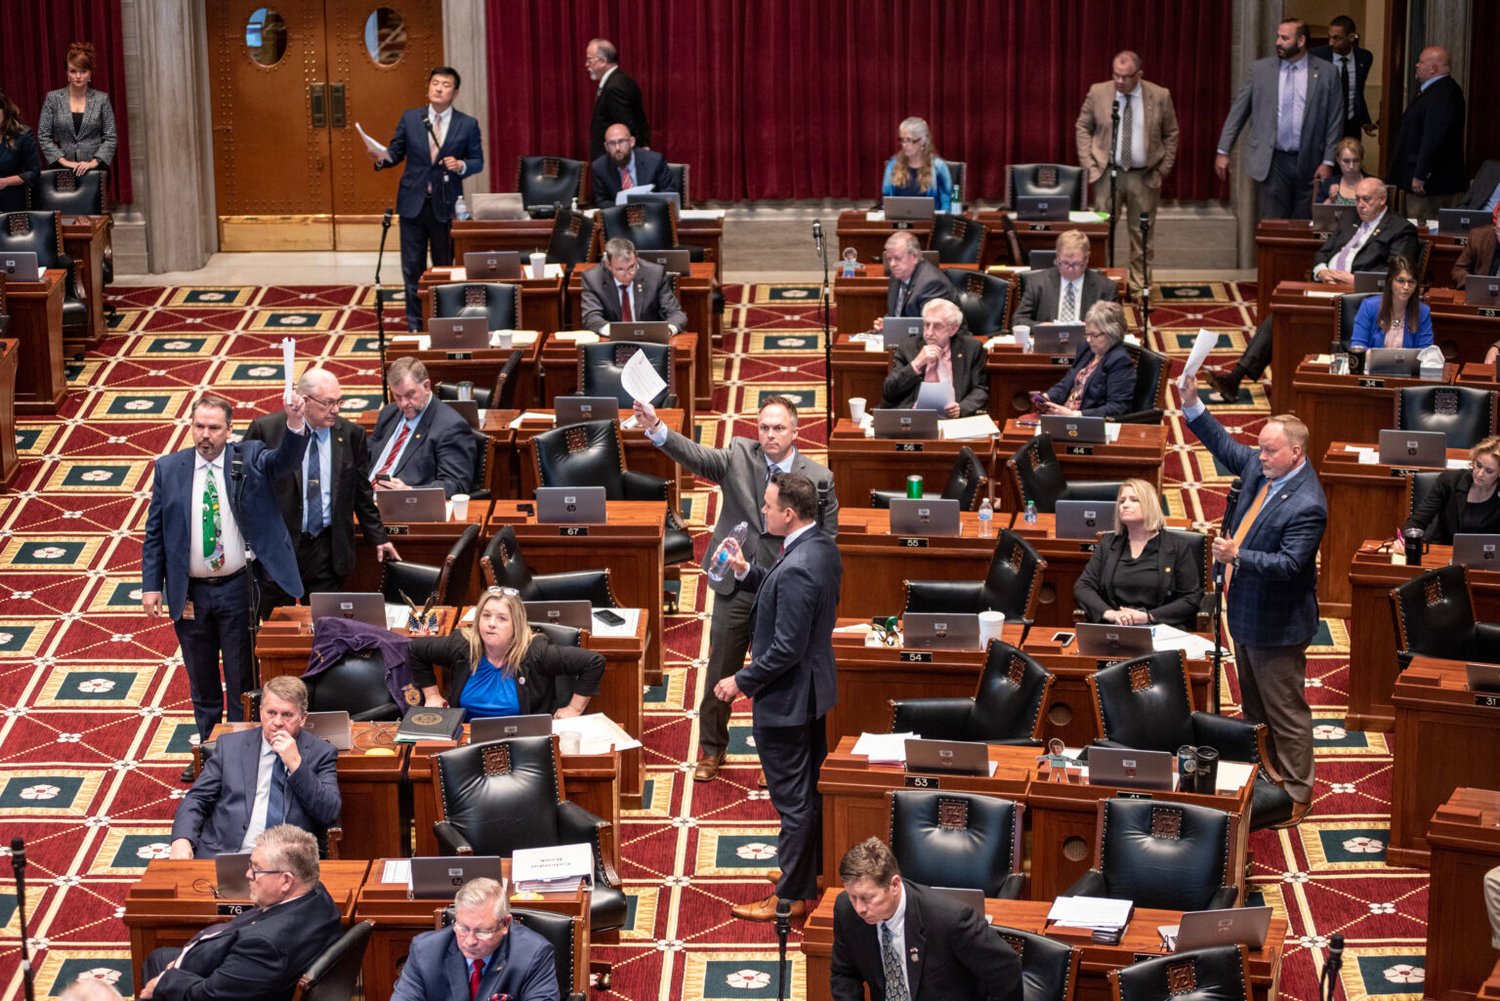 Missouri House Republicans raise their hands to speak on a ban for gender-affirming care for minors as House Majority Leader Jon Patterson, R-Lee's Summit, moves for a vote.